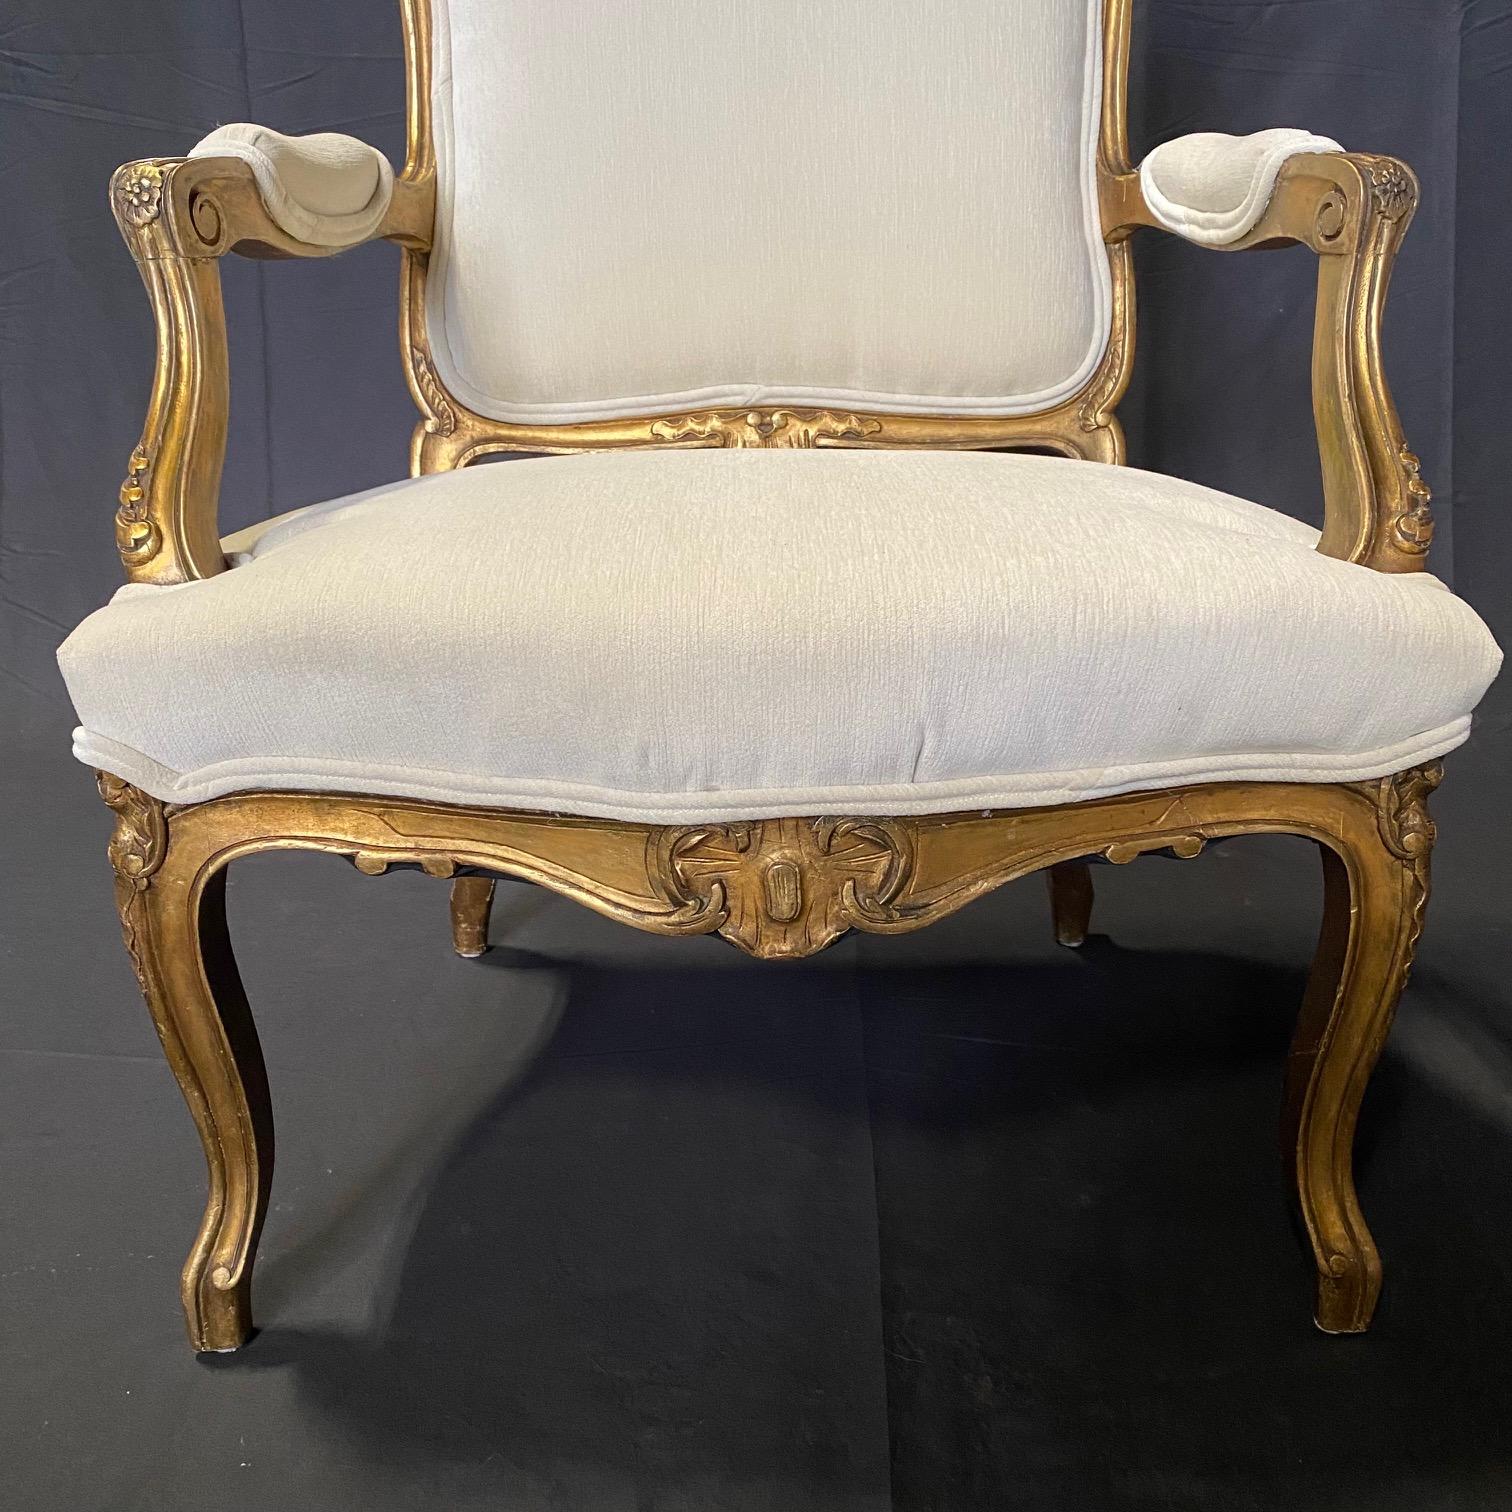  Pair of Antique French Louis XV Fauteuil Gilded Arm Chairs  For Sale 2